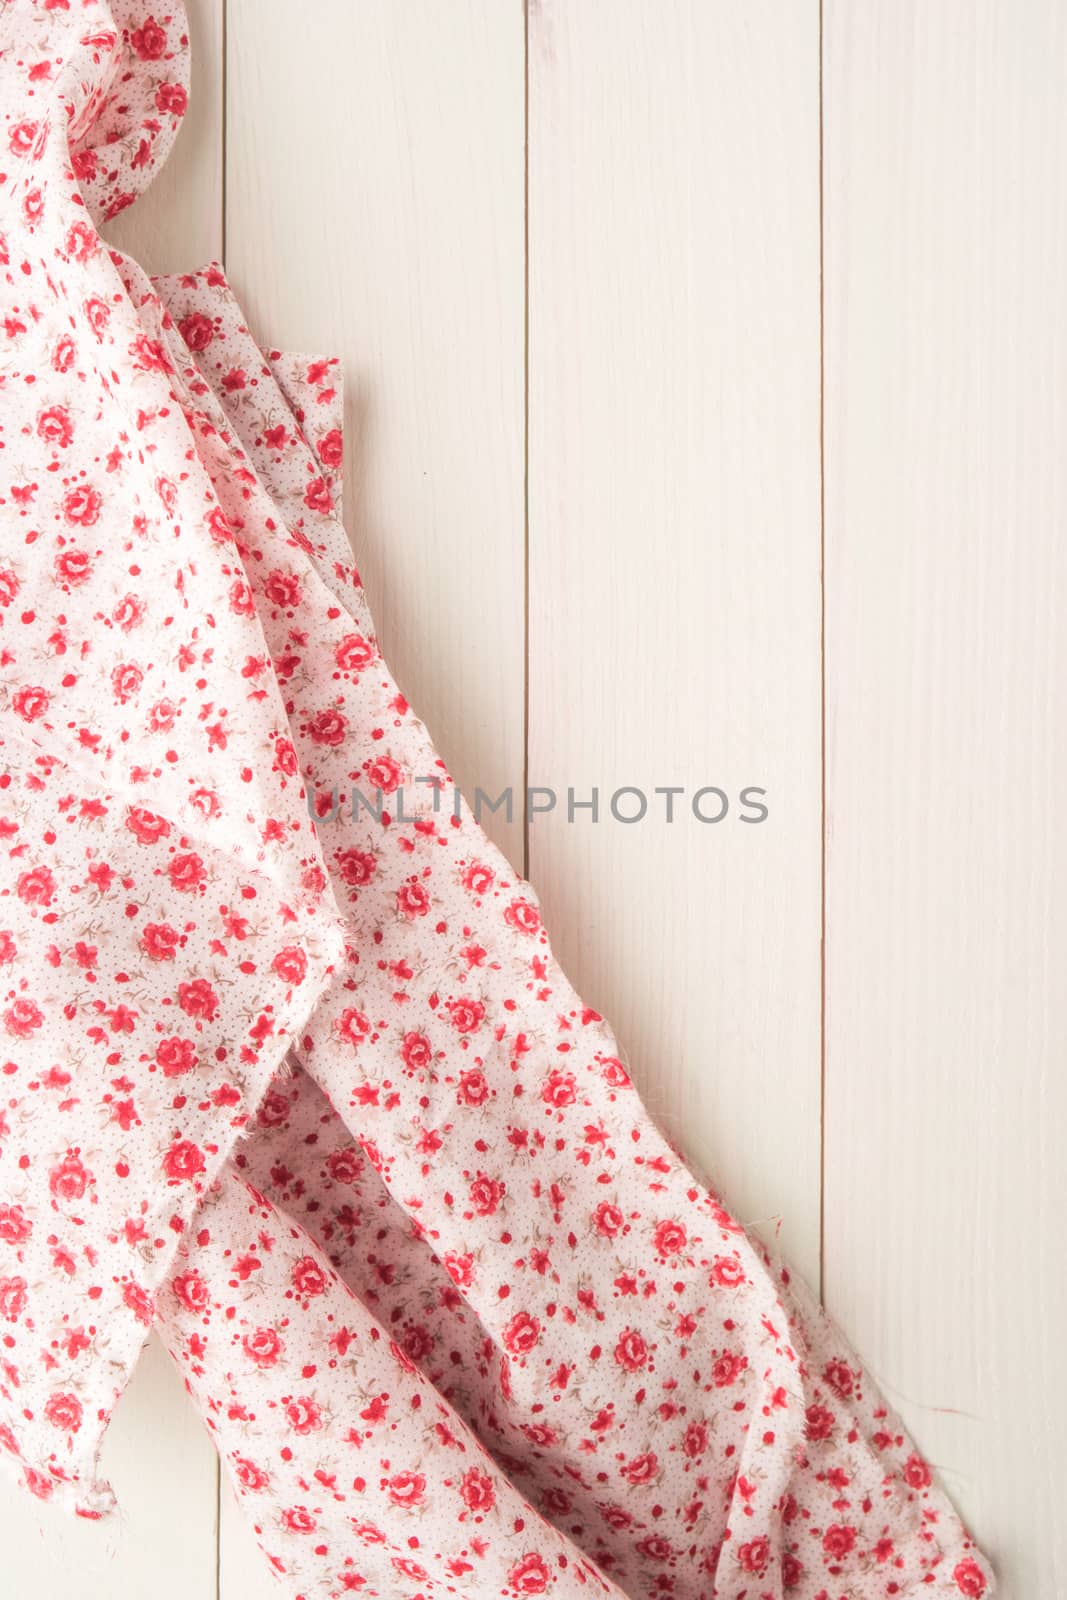 Little flowers fabric over wooden kitchen table. by AnaMarques